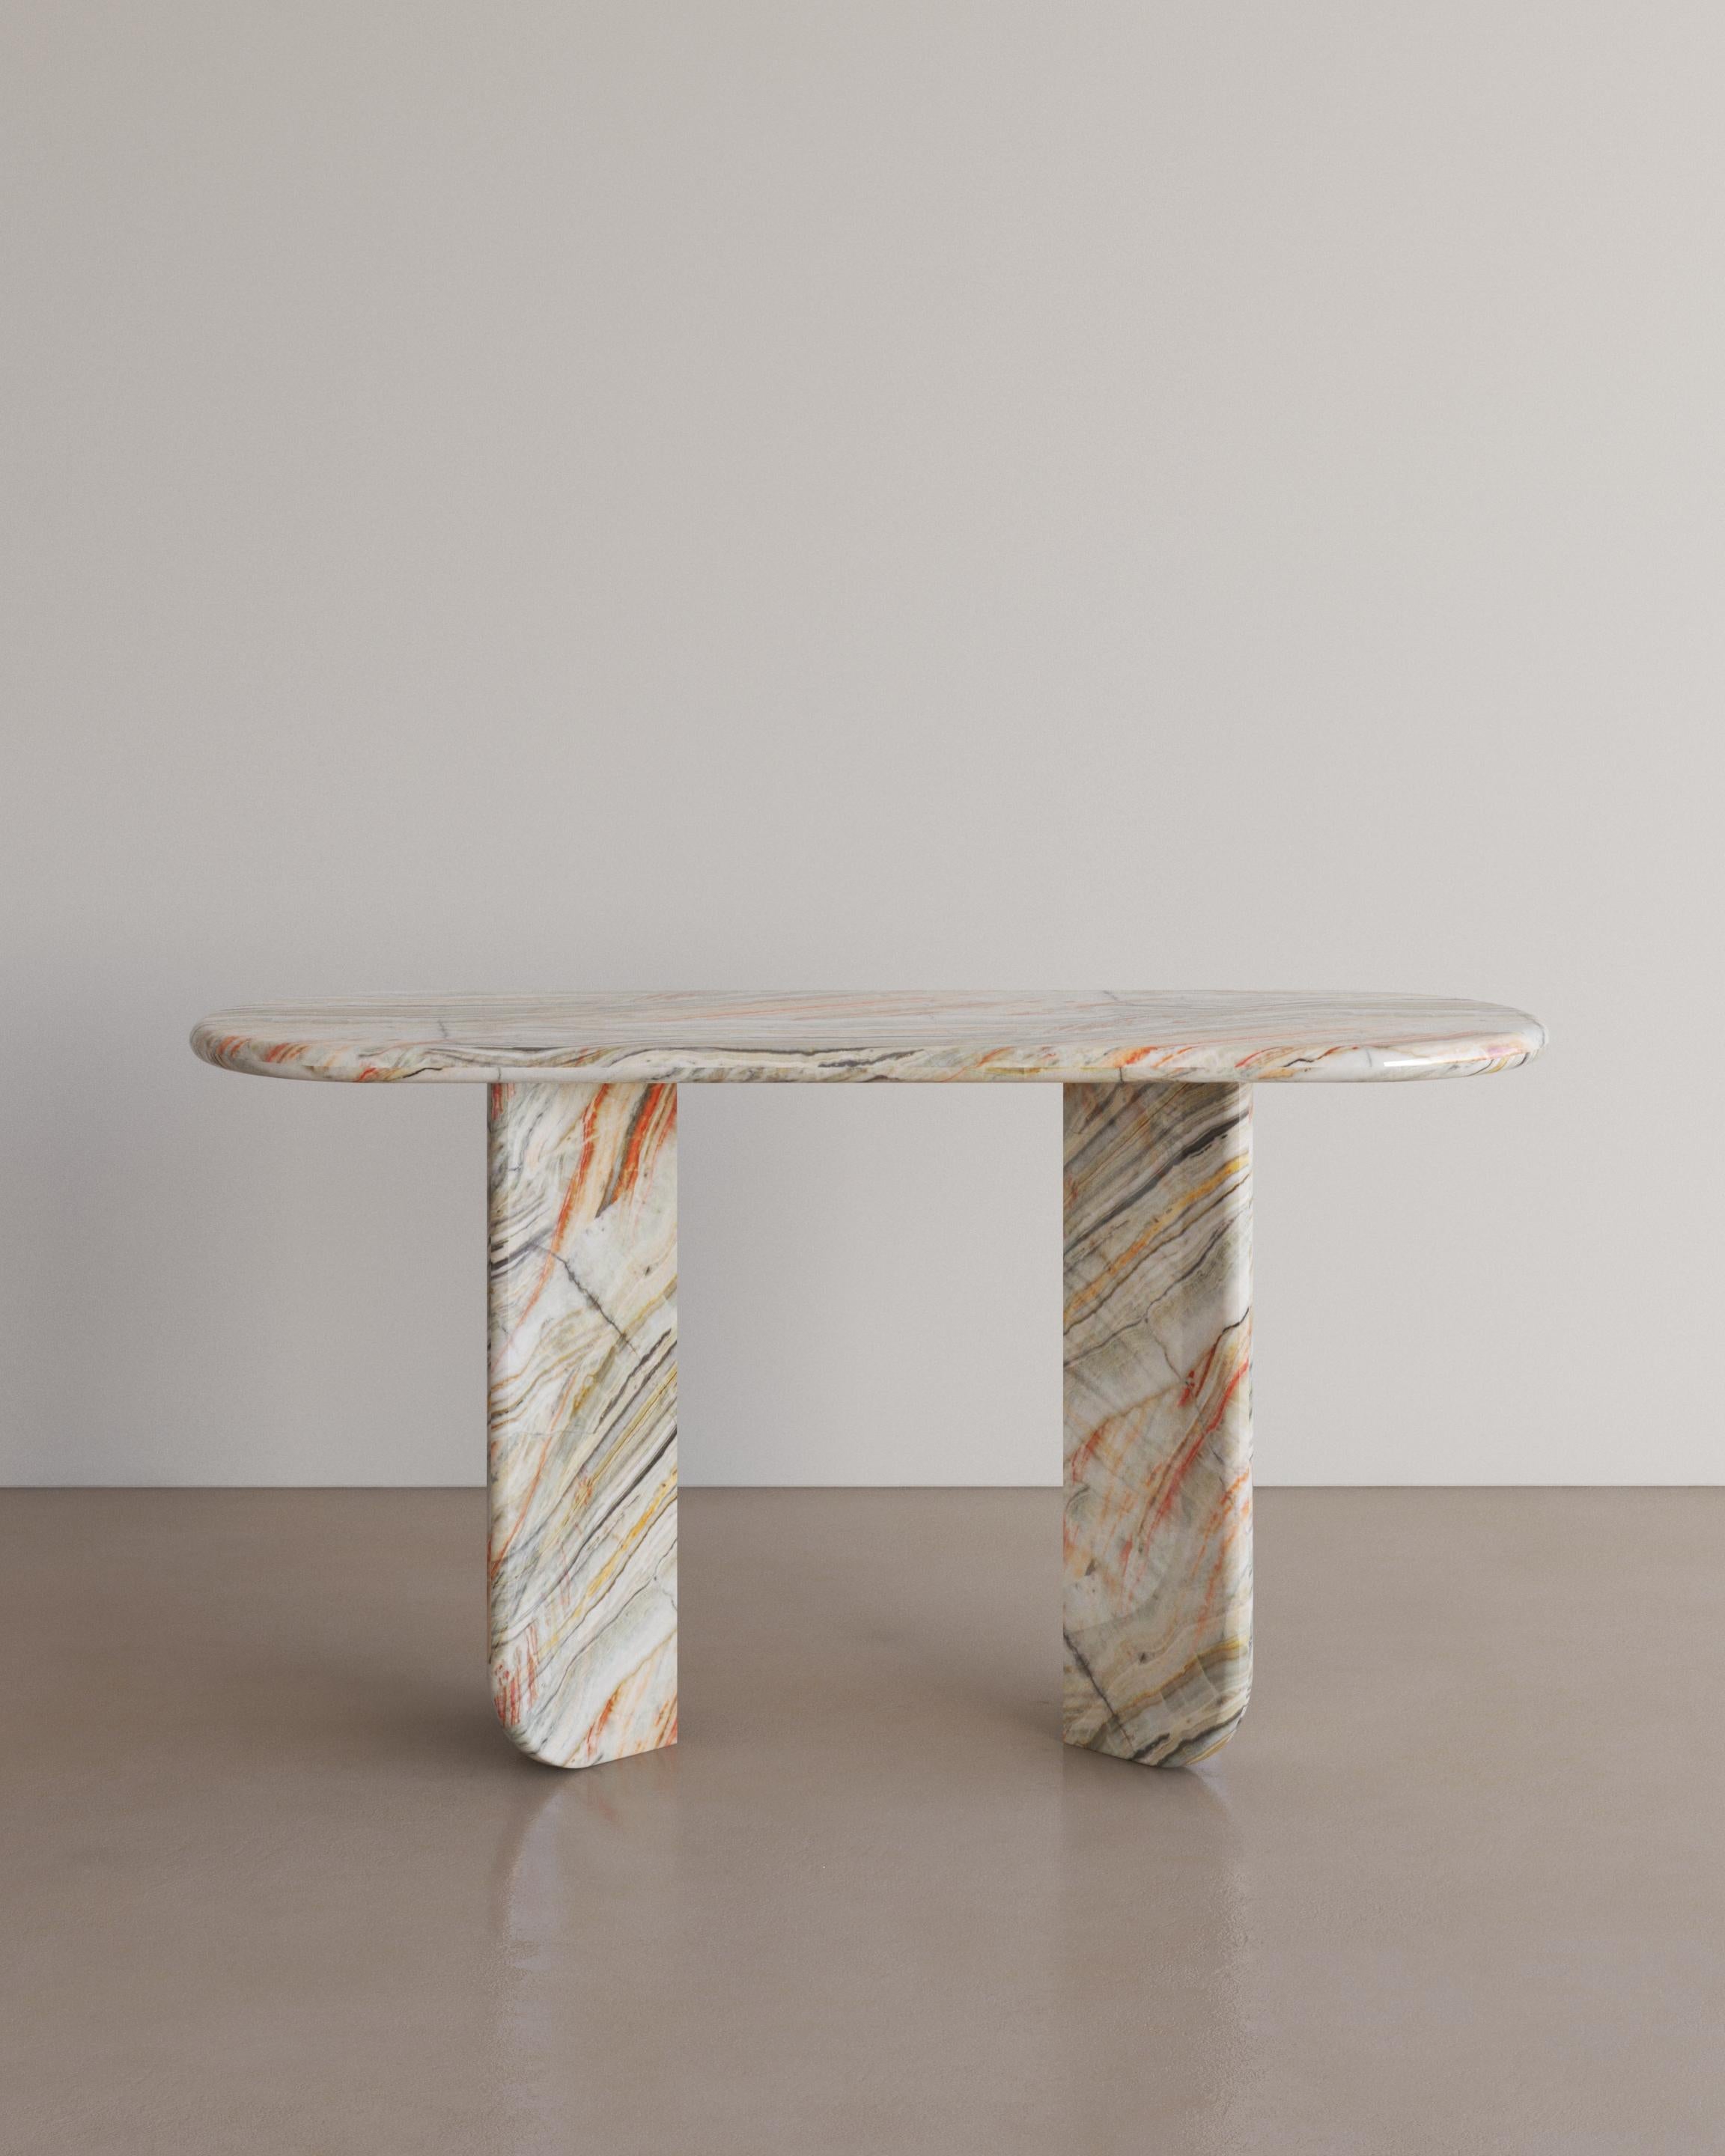 The Essentialist presents the Ètoile Console Table in Rainbow Onyx. An elongated oval stacks upon 2 chevron bases. Smooth planes exonerate beautiful natural patterning, poised between transience and permanence, between form and the absence of form.